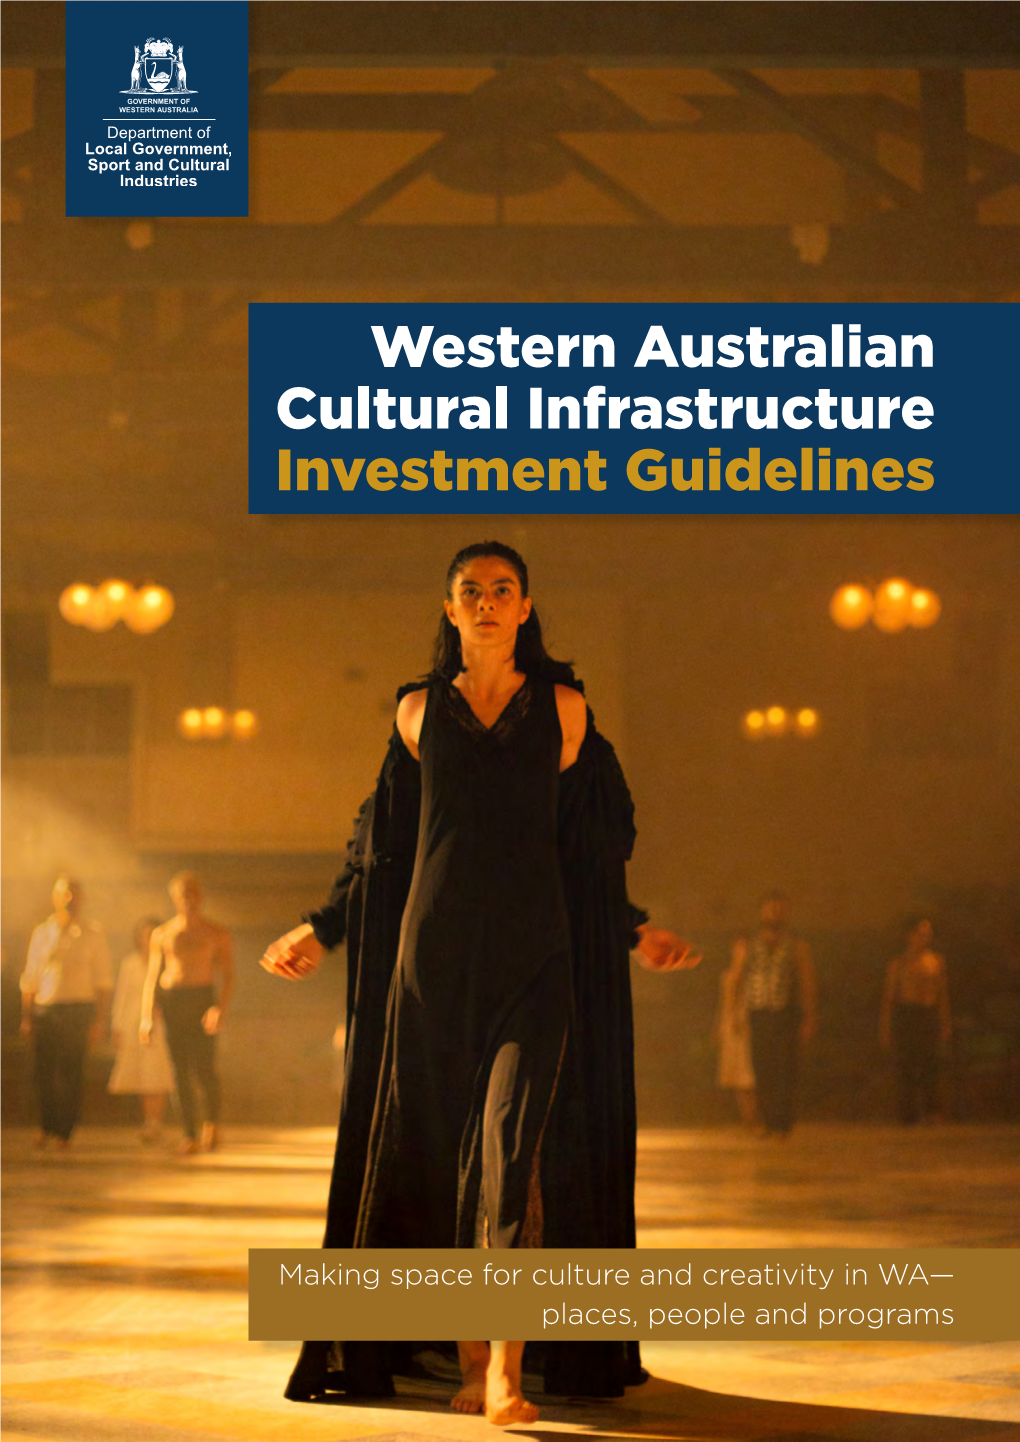 Western Australian Cultural Infrastructure Investment Guidelines